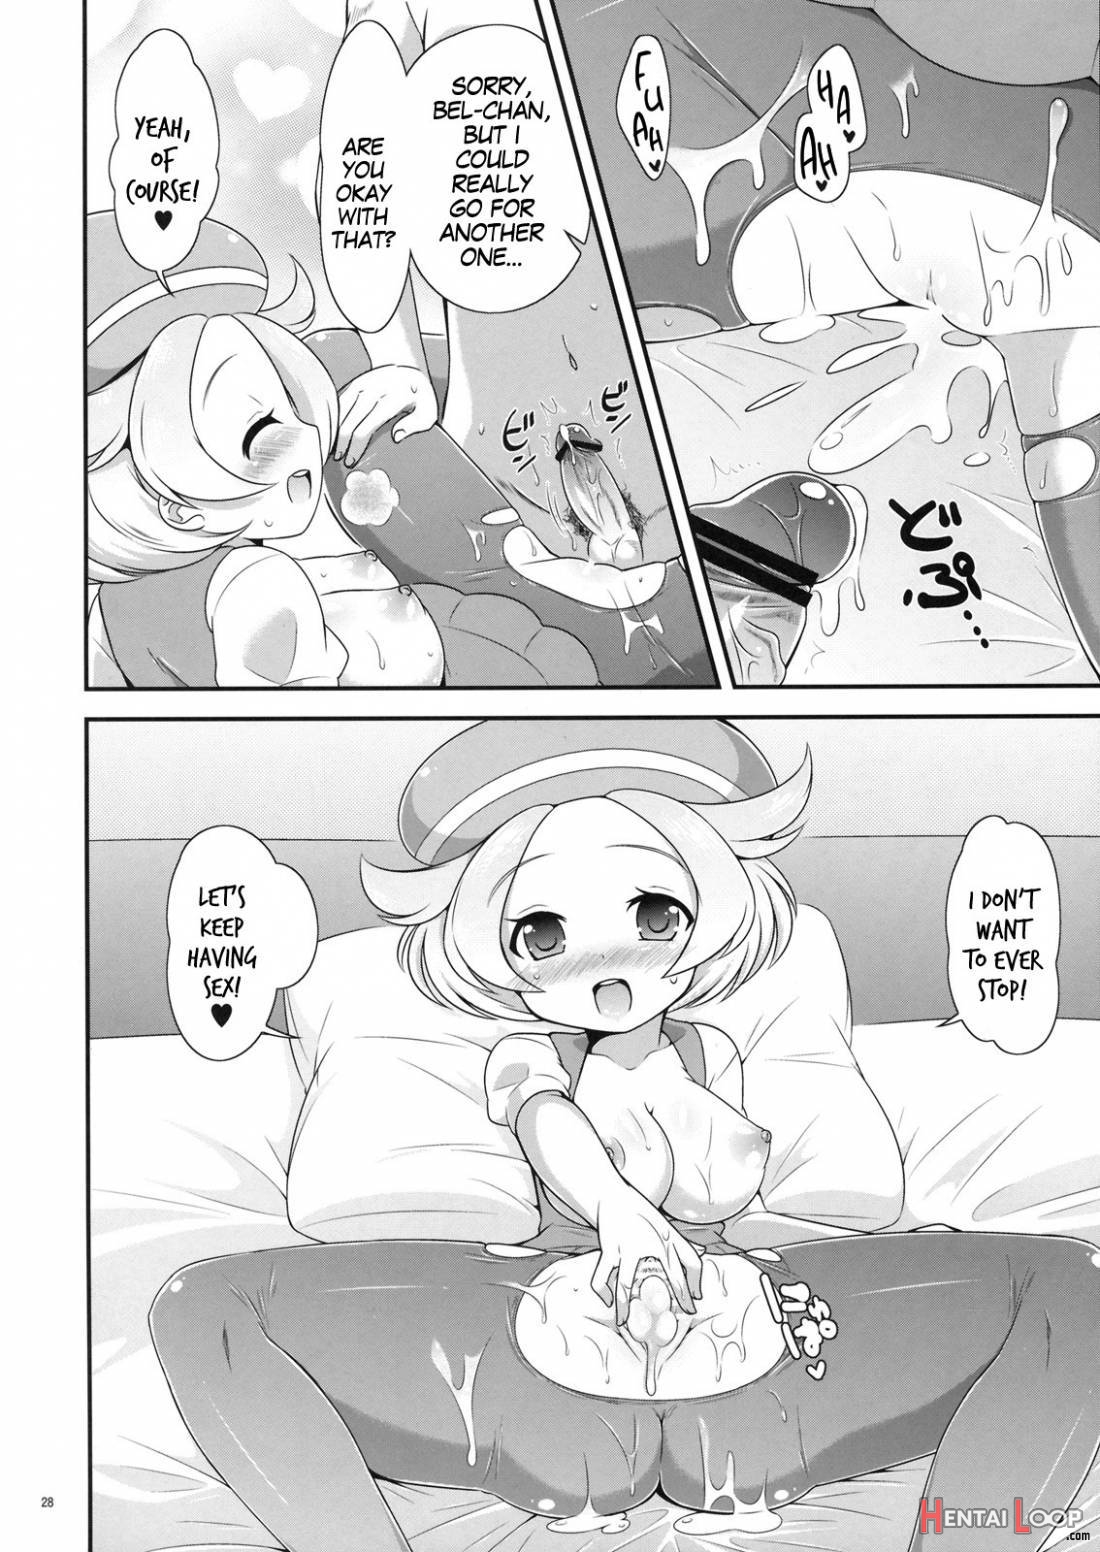 Bel-chan To Asobo! page 27